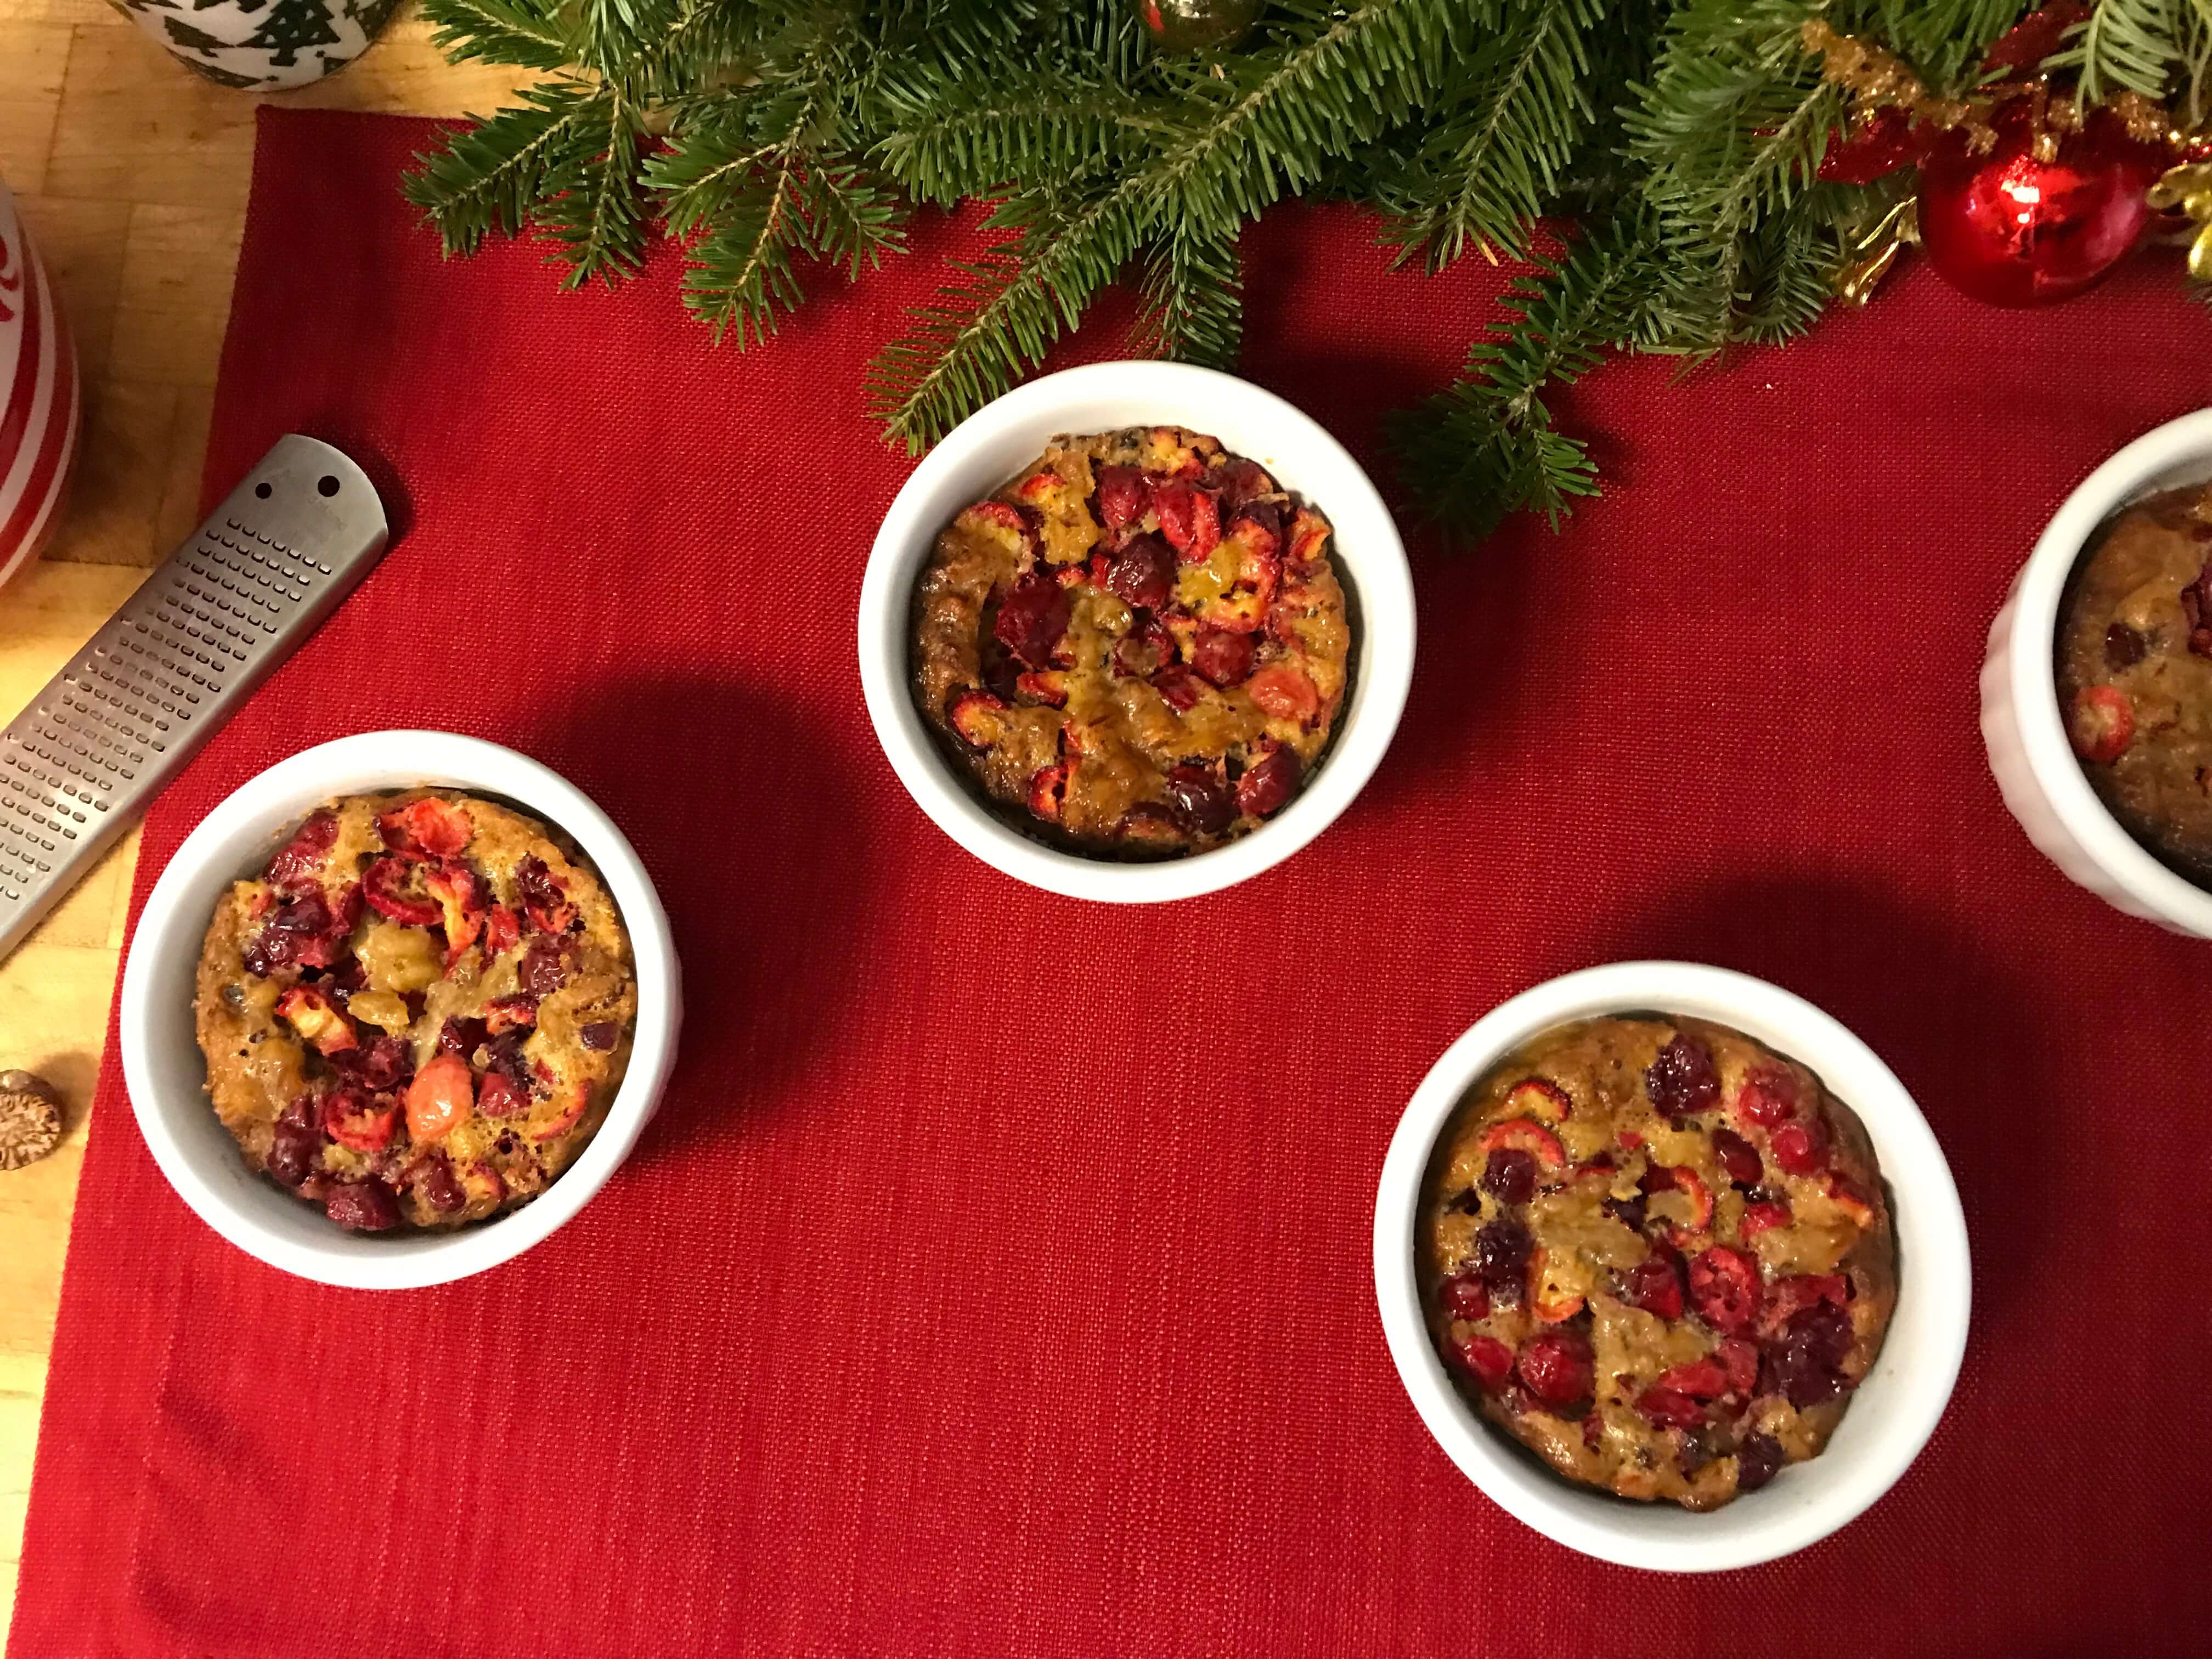 This low carb Christmas pudding is the perfect dessert to serve for the holidays. The flavours of walnut & cranberries are the perfect holiday combination.